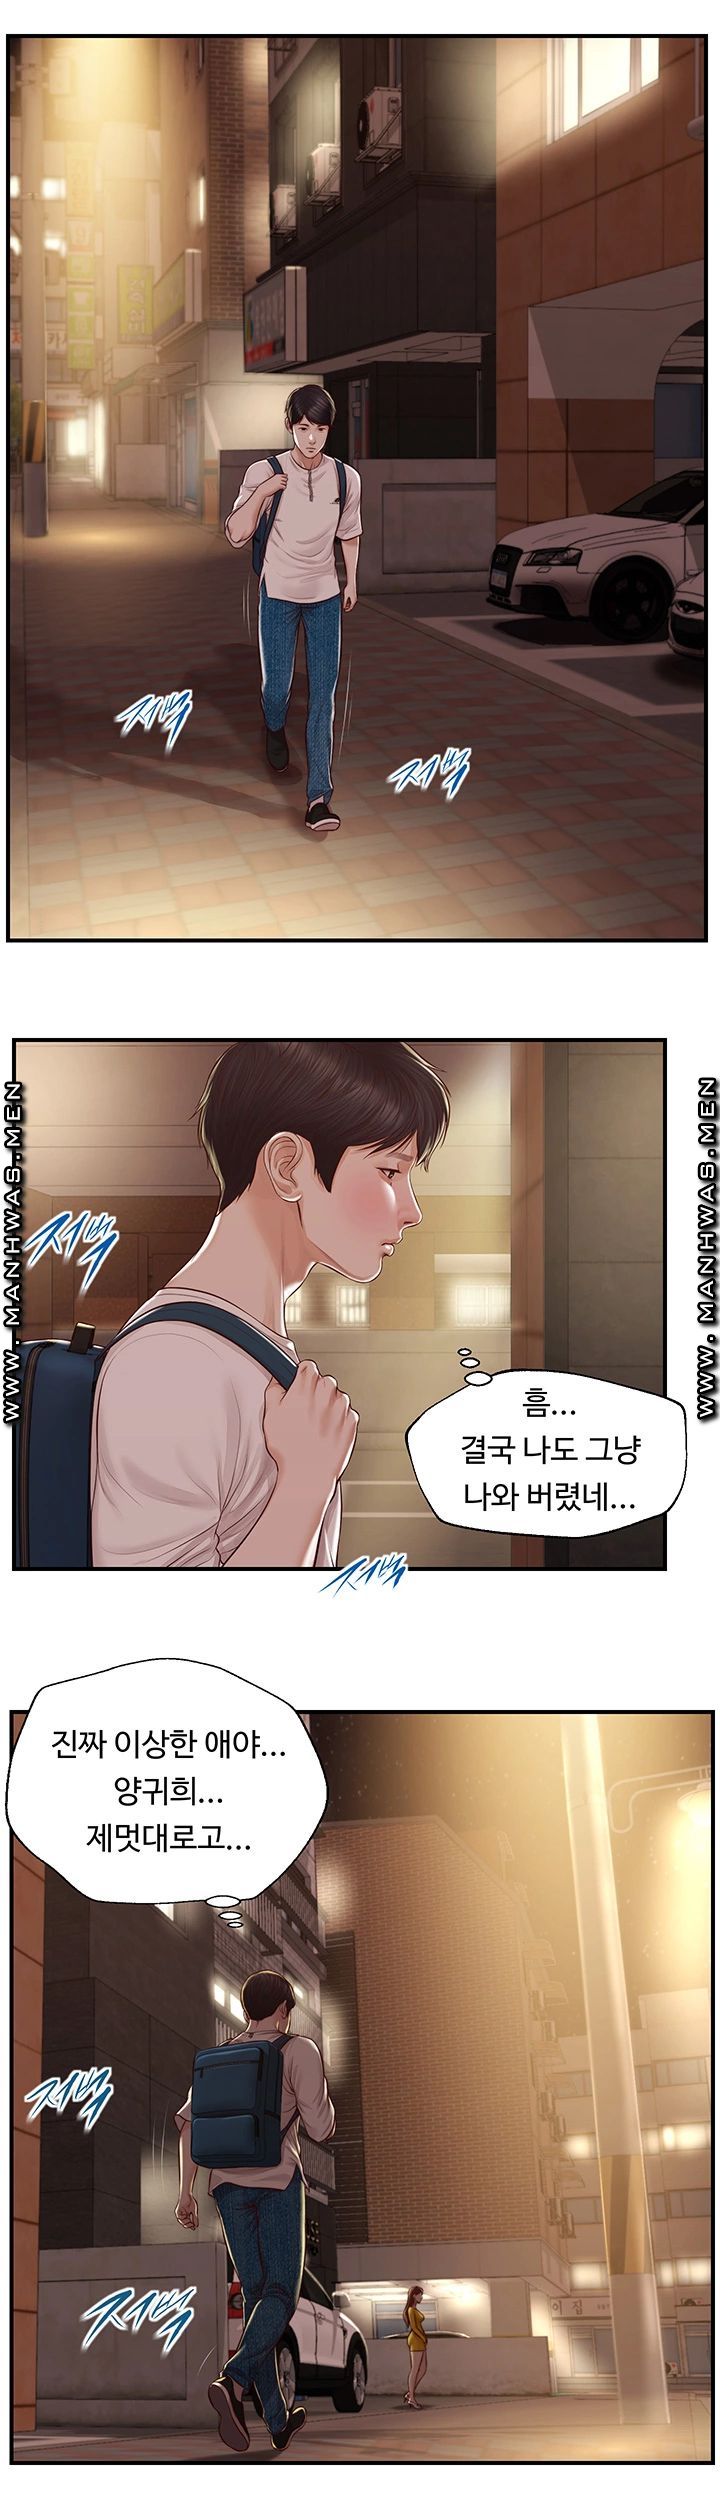 Innocent Age Raw - Chapter 3 Page 27